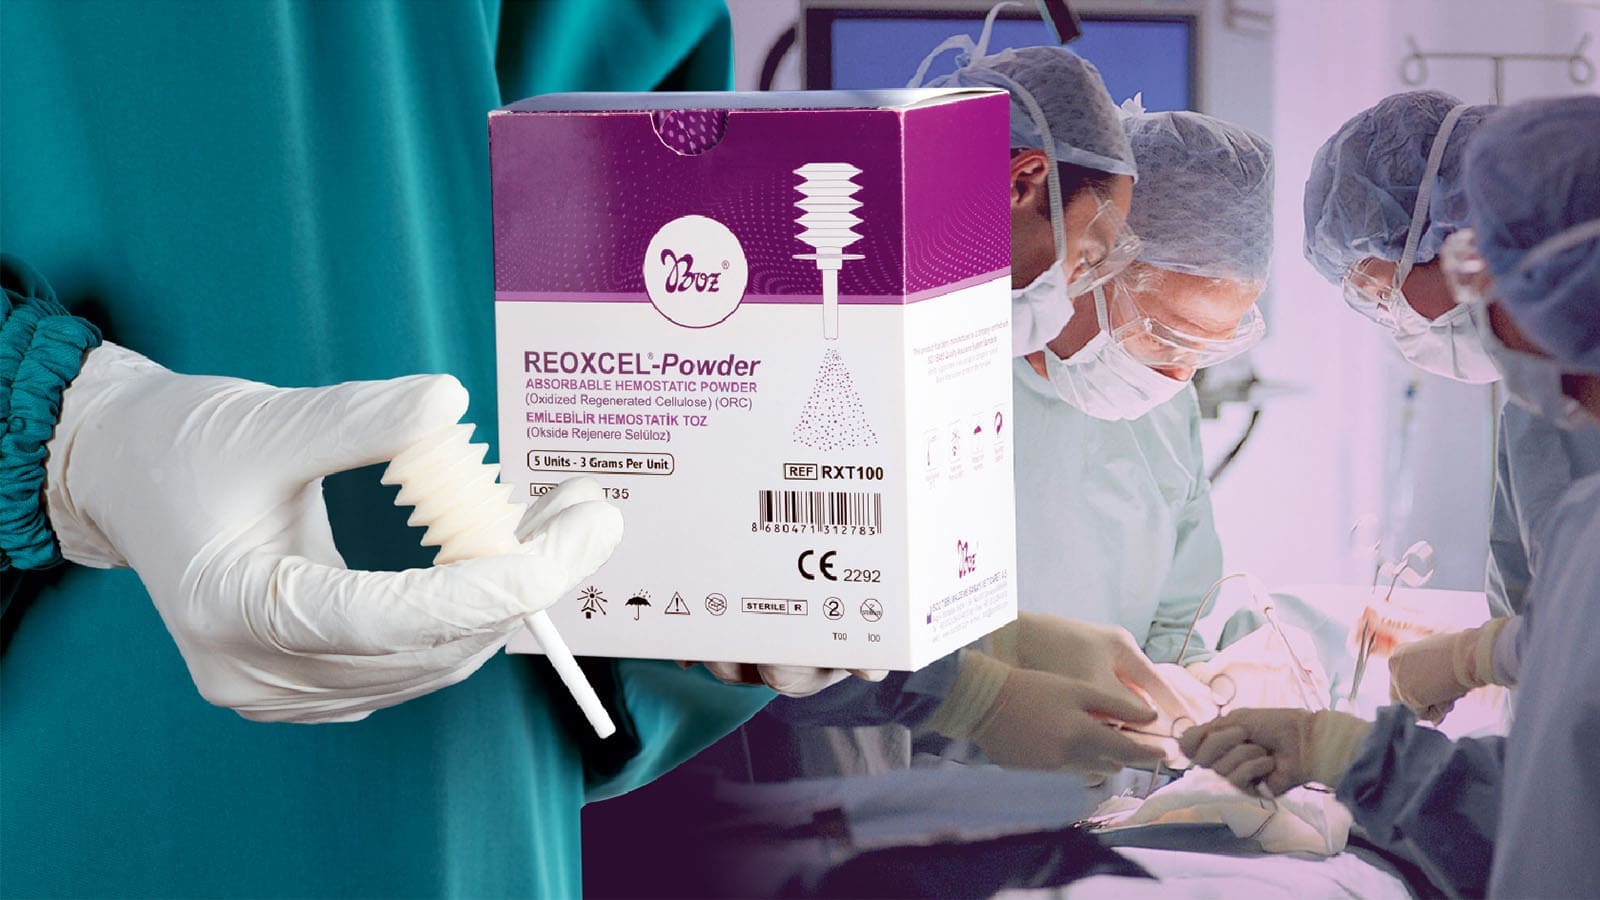 New Reoxcel Powder sterile and absorbable hemostat